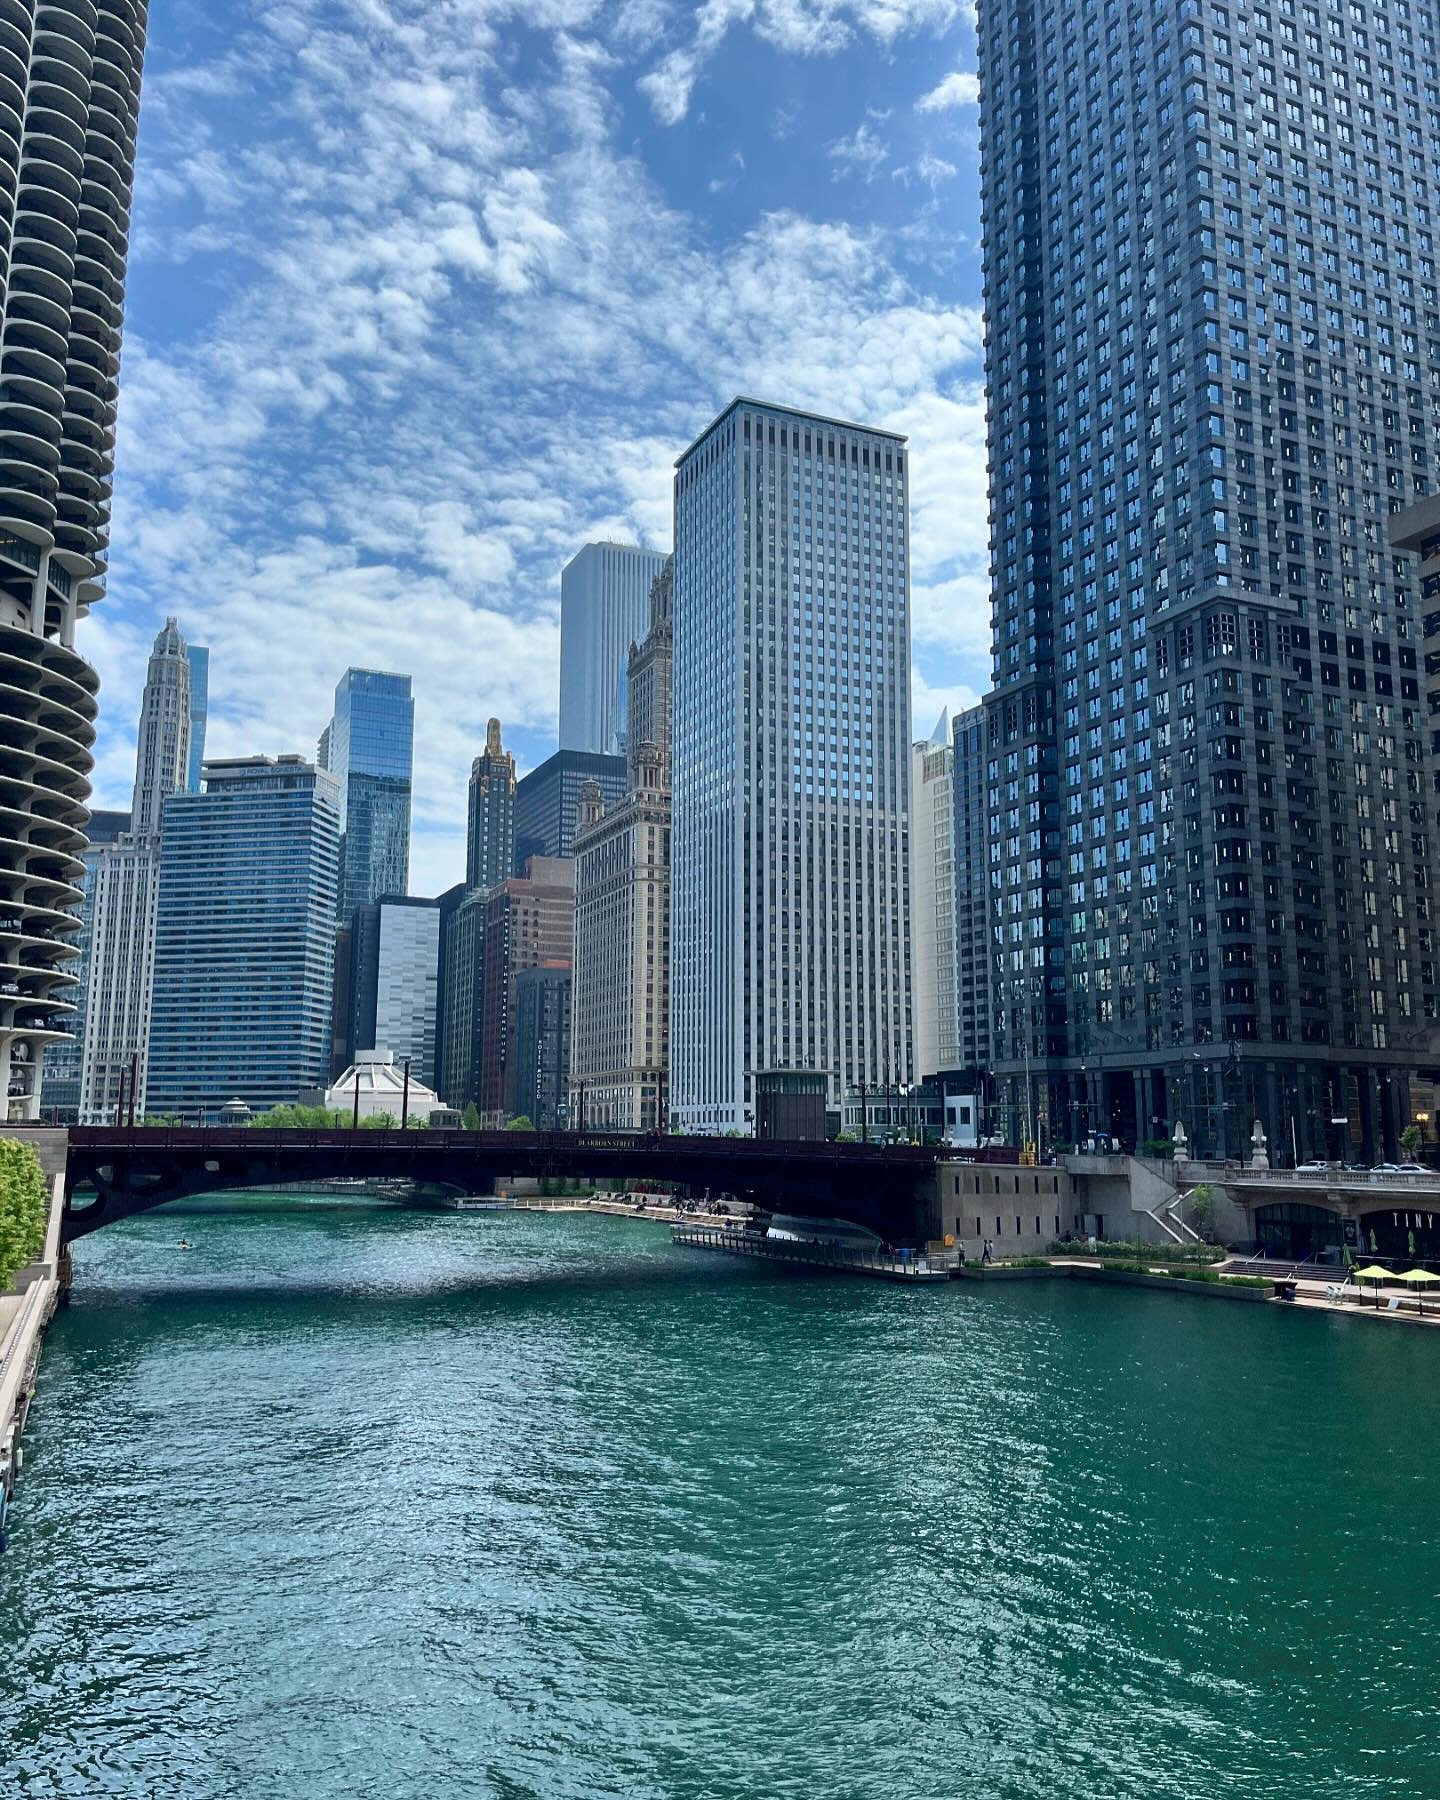 Great day for a retail tour of Chicago 😎#aurorarealtyconsultants